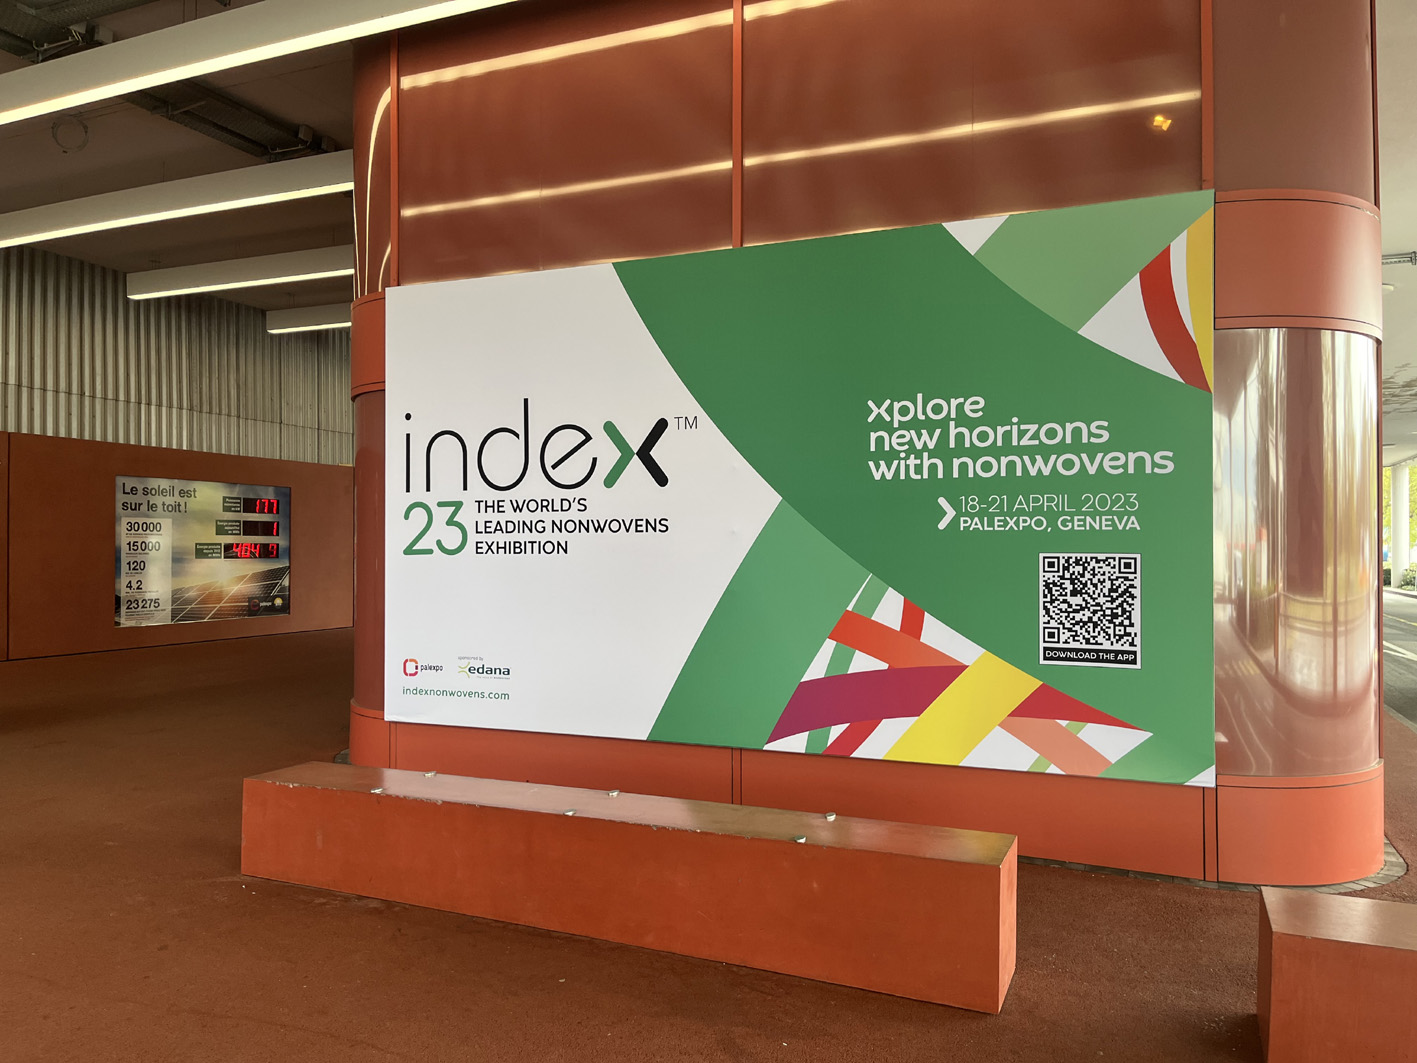 INDEX, the leading nonwovens exhibition, next takes place in Geneva, Switzerland, from May 19-26 2026.